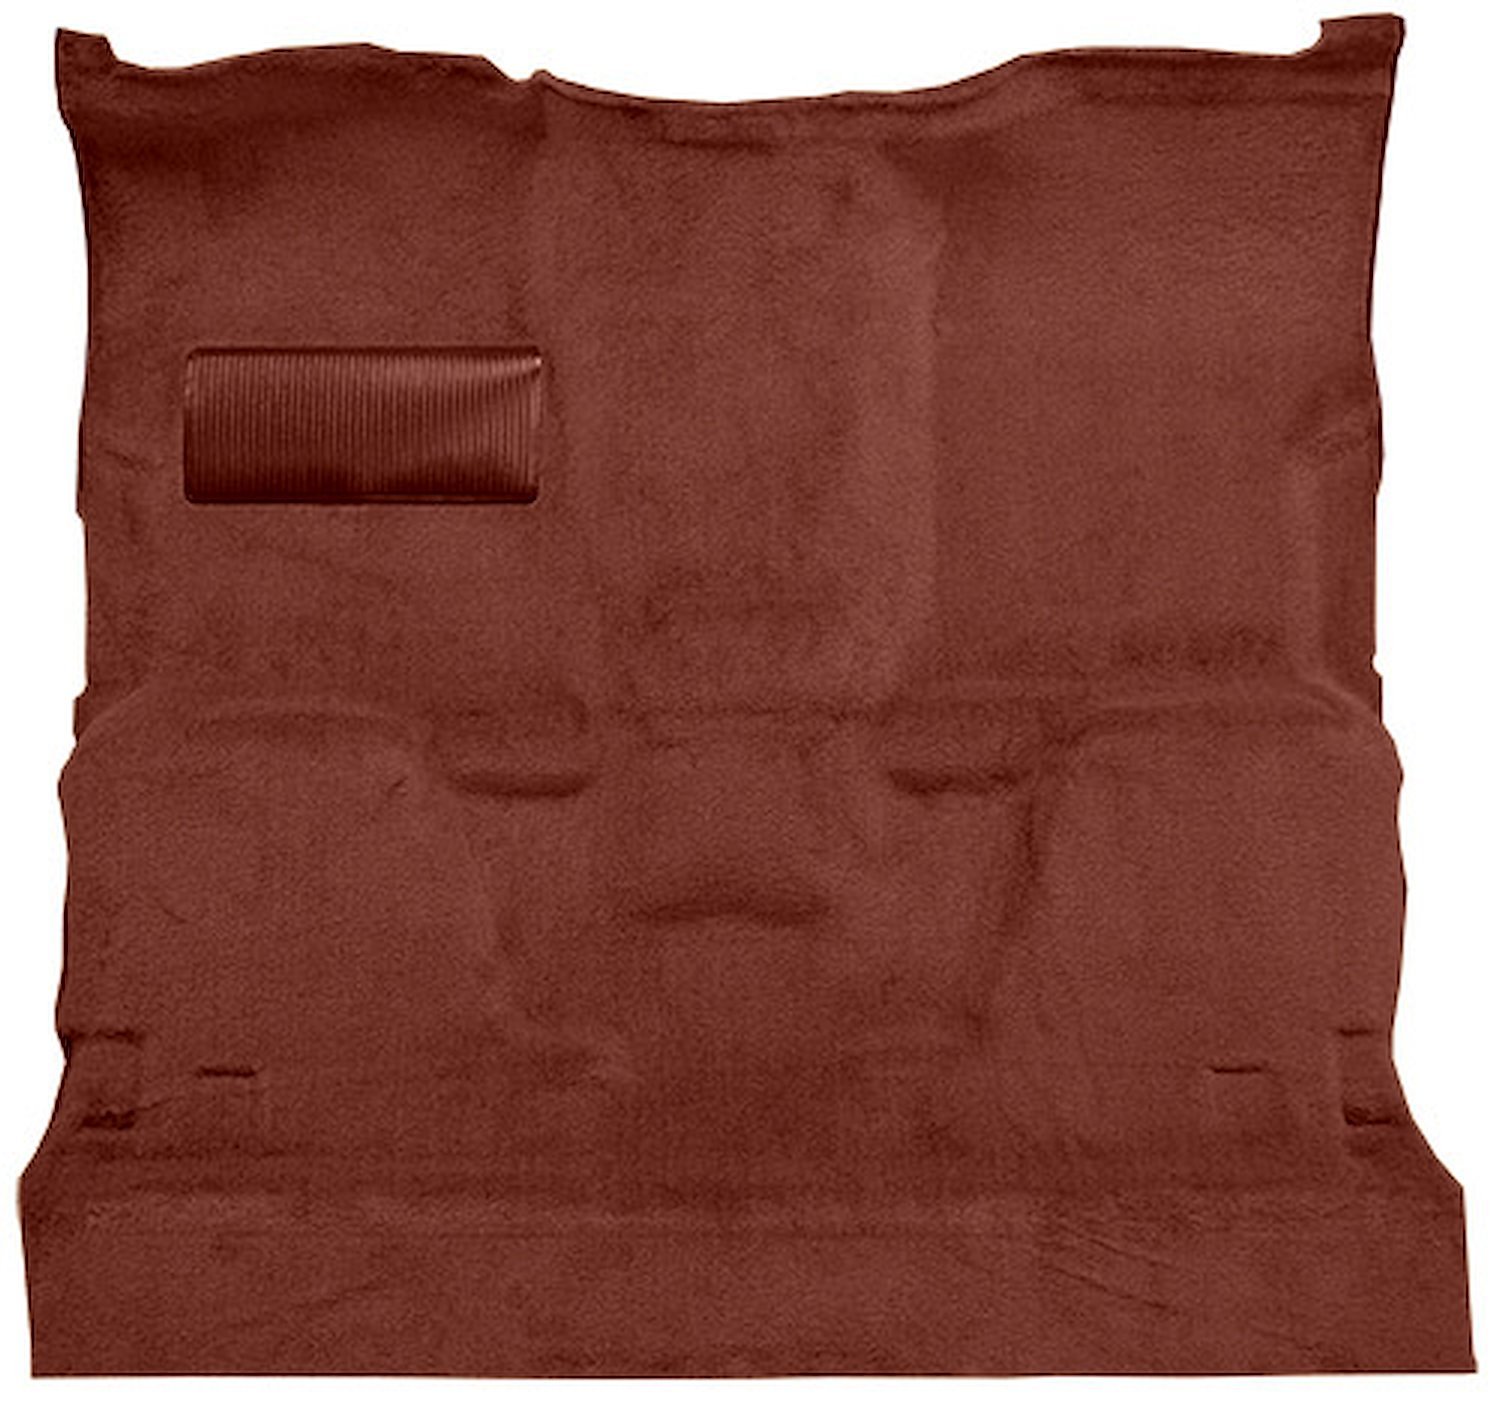 Molded Cut Pile Carpet for 1981-1986 GM C Series Regular Cab Trucks w/Automatic or 3-Speed [Mass Backing Maple/Canyon]